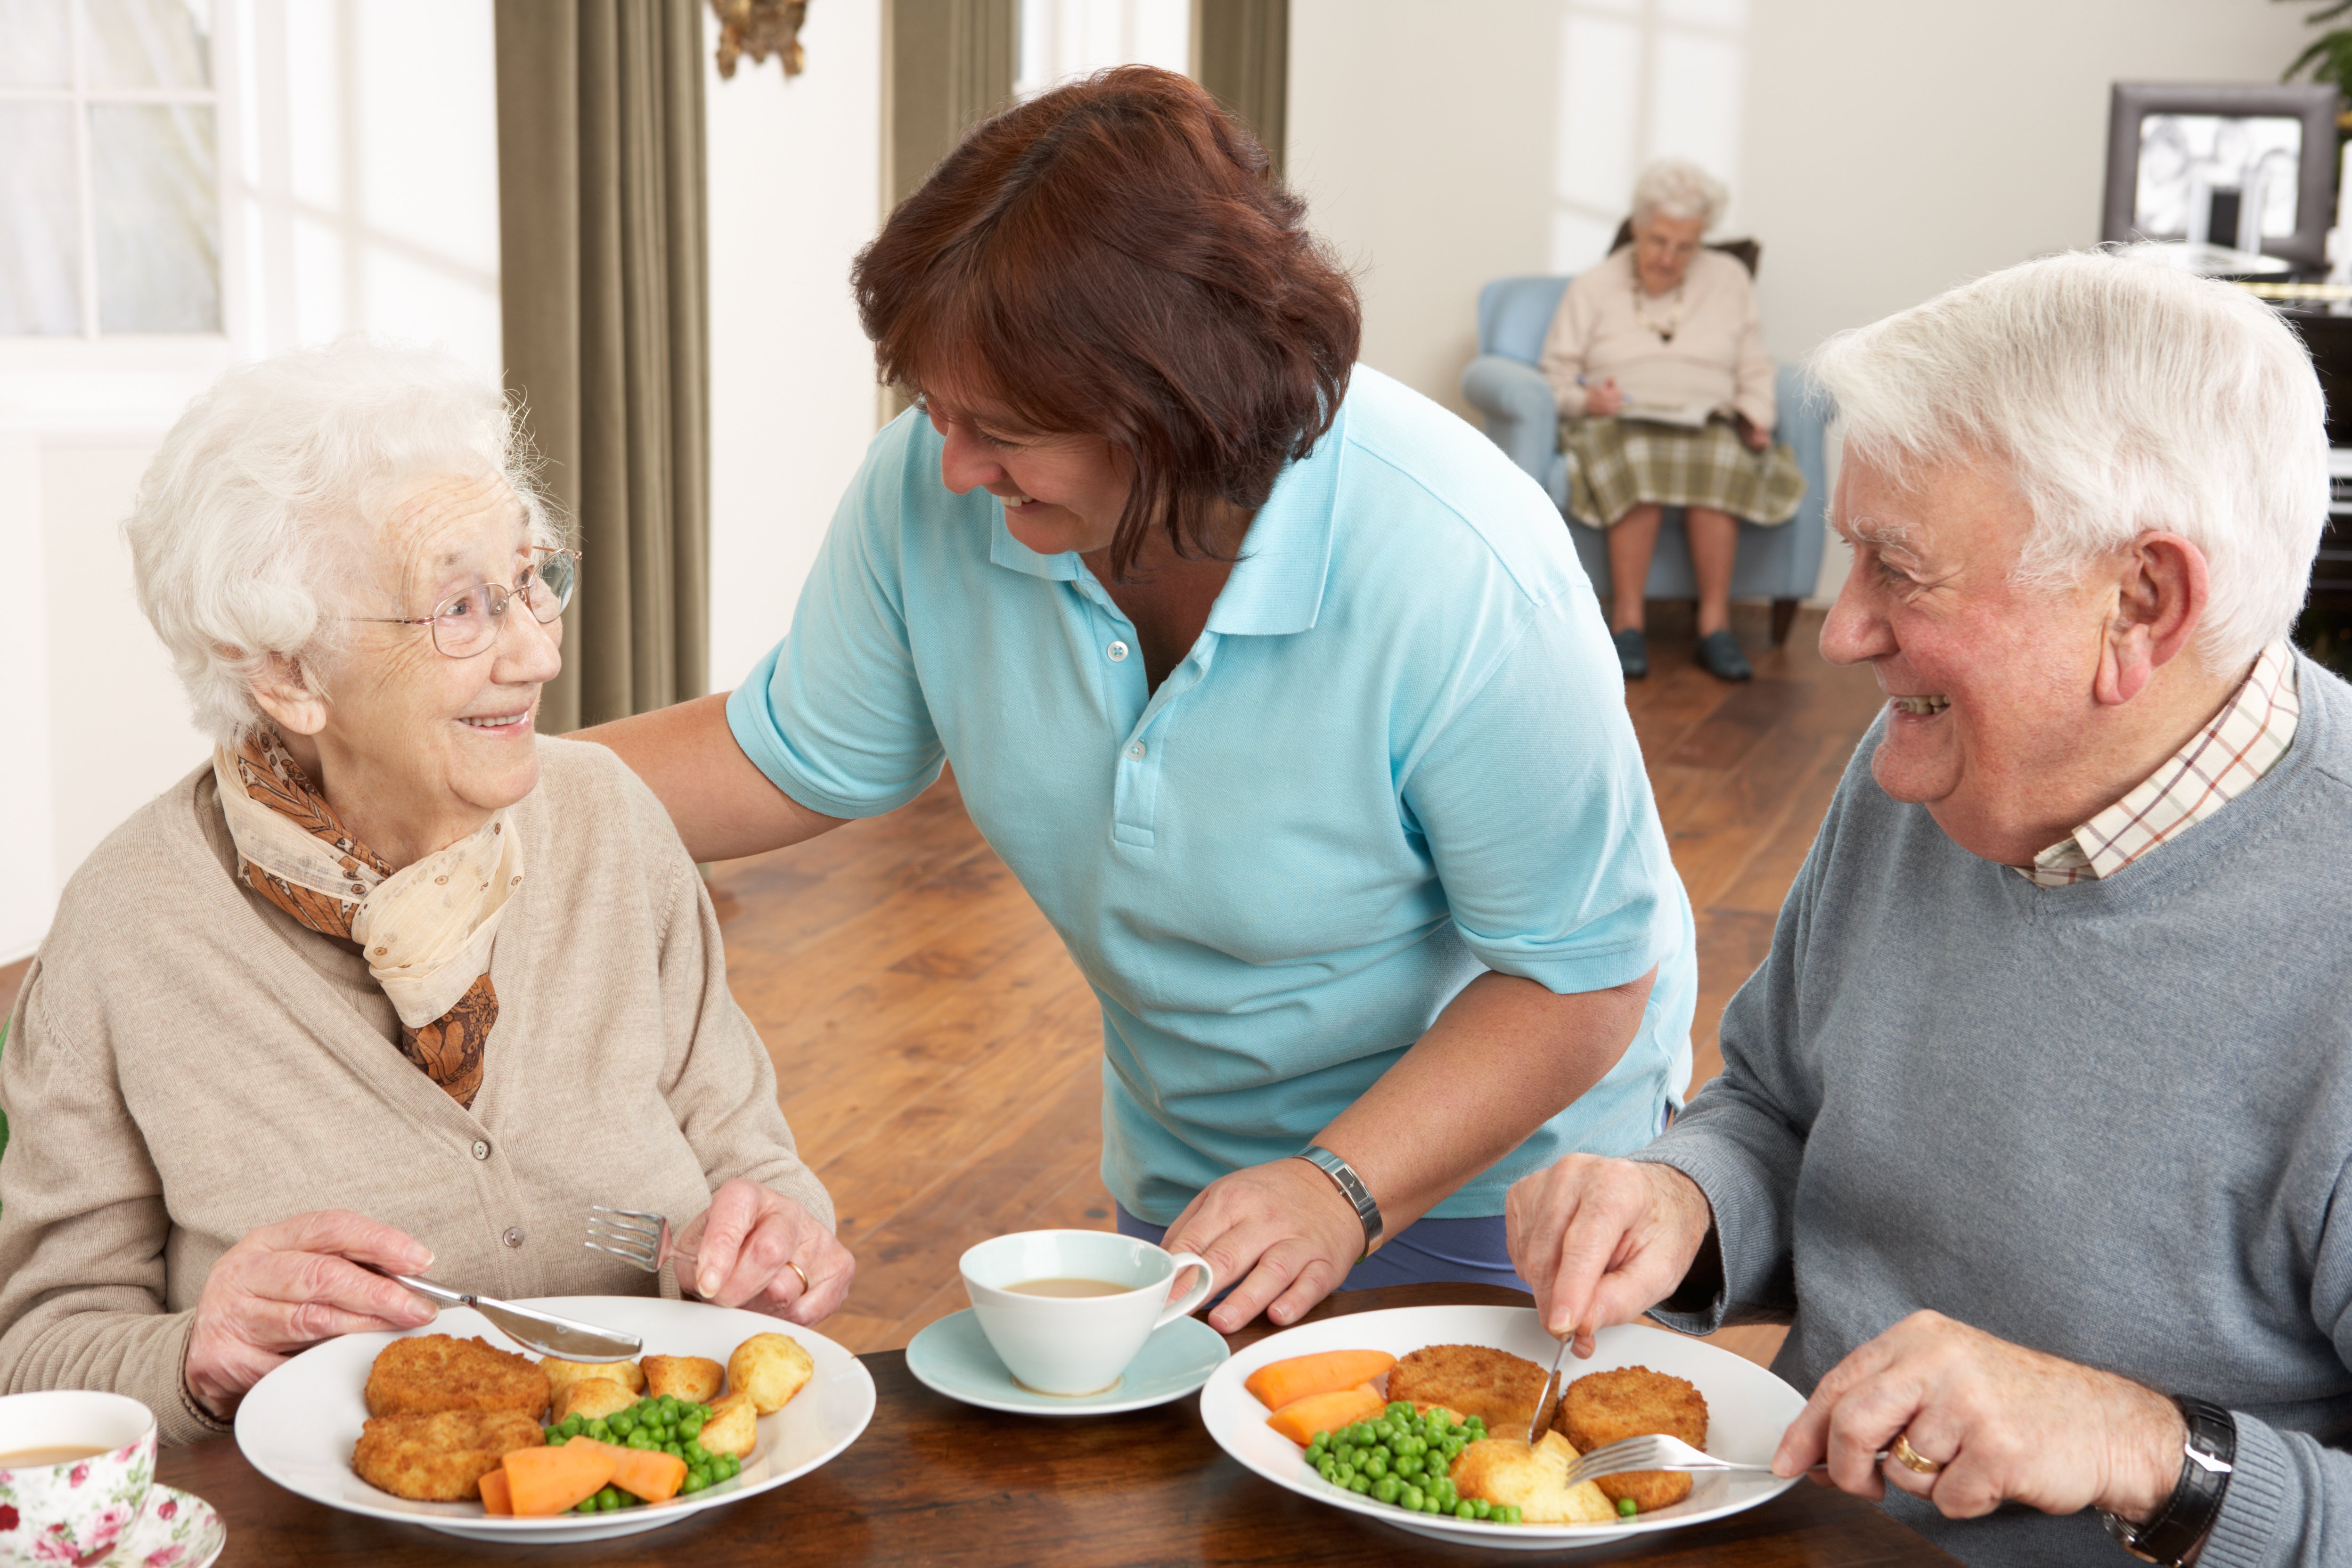 Caregiver wearing scrubs serving meal to senior man and woman at dining table